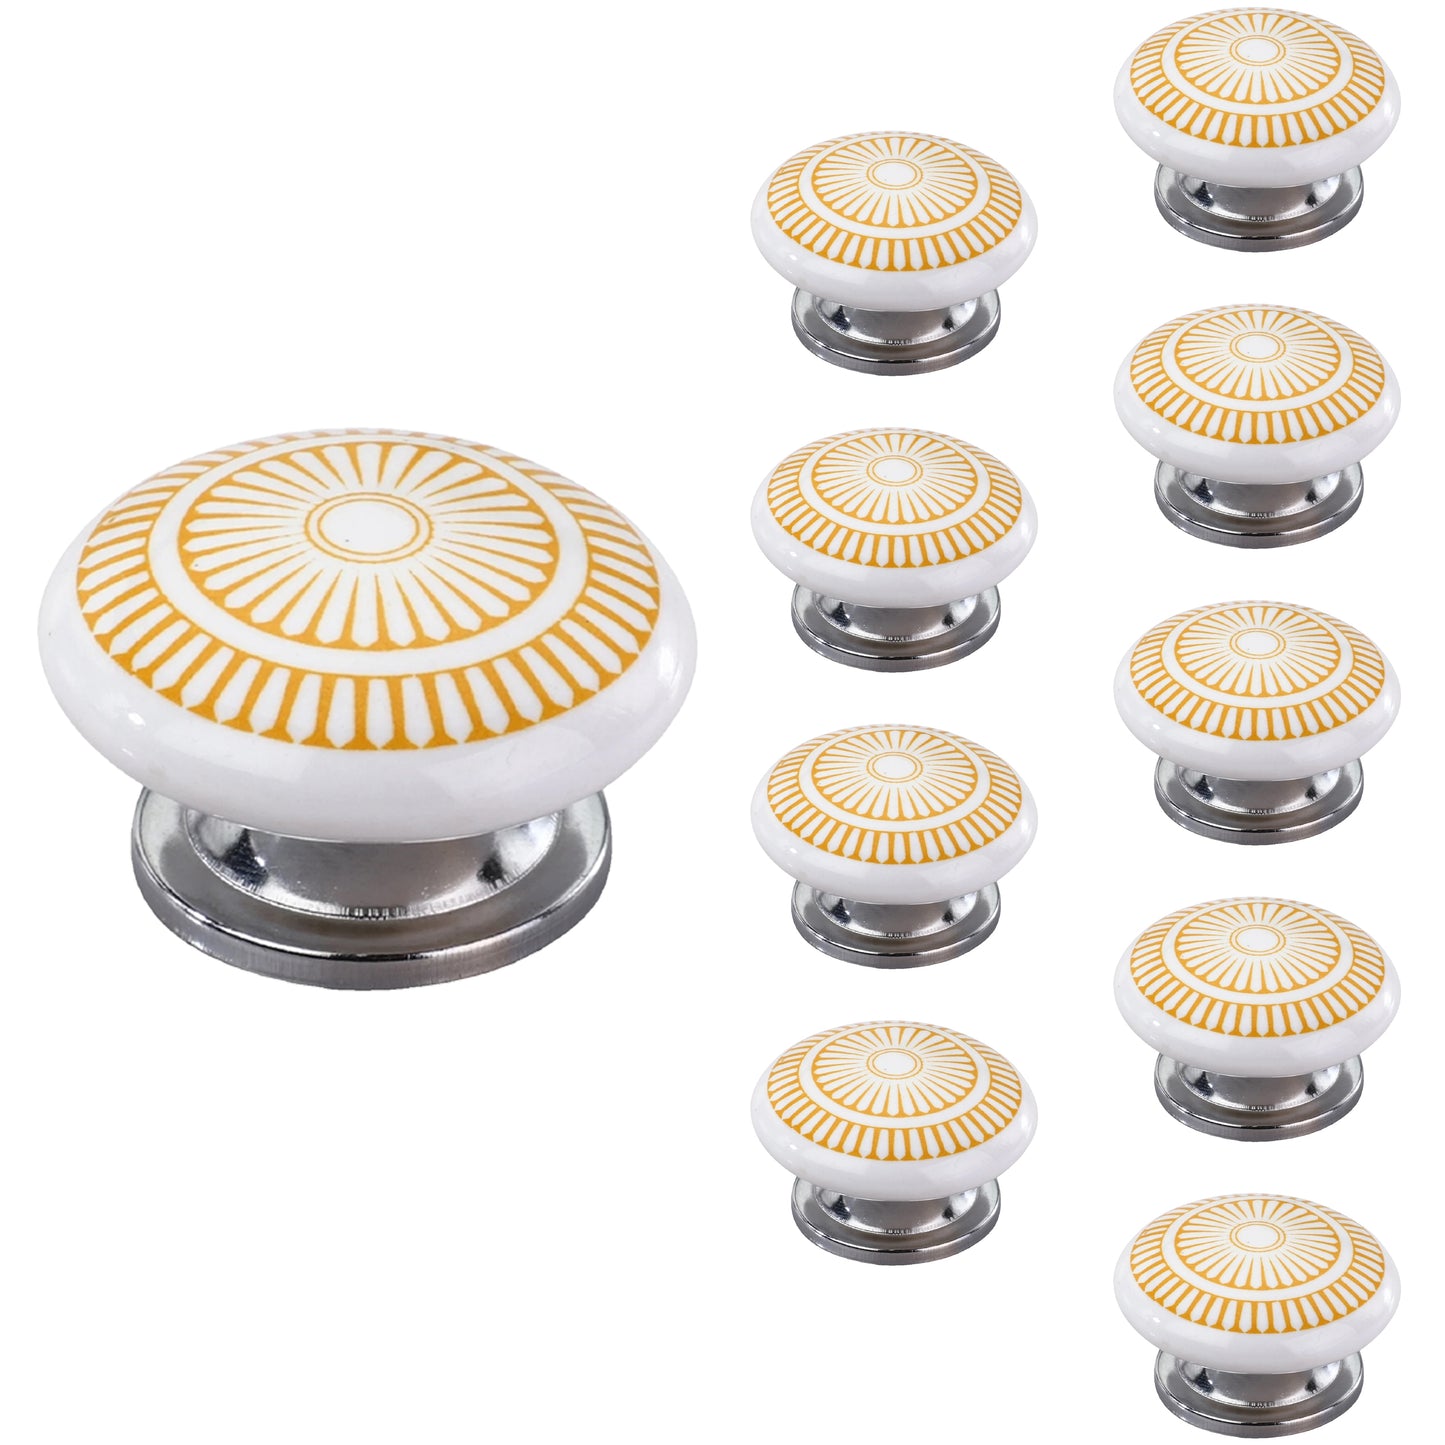 Mascot Hardware Cobble Rosette 1-3/5 in. Yellow, Grey Cabinet Knob (Pack of 10)